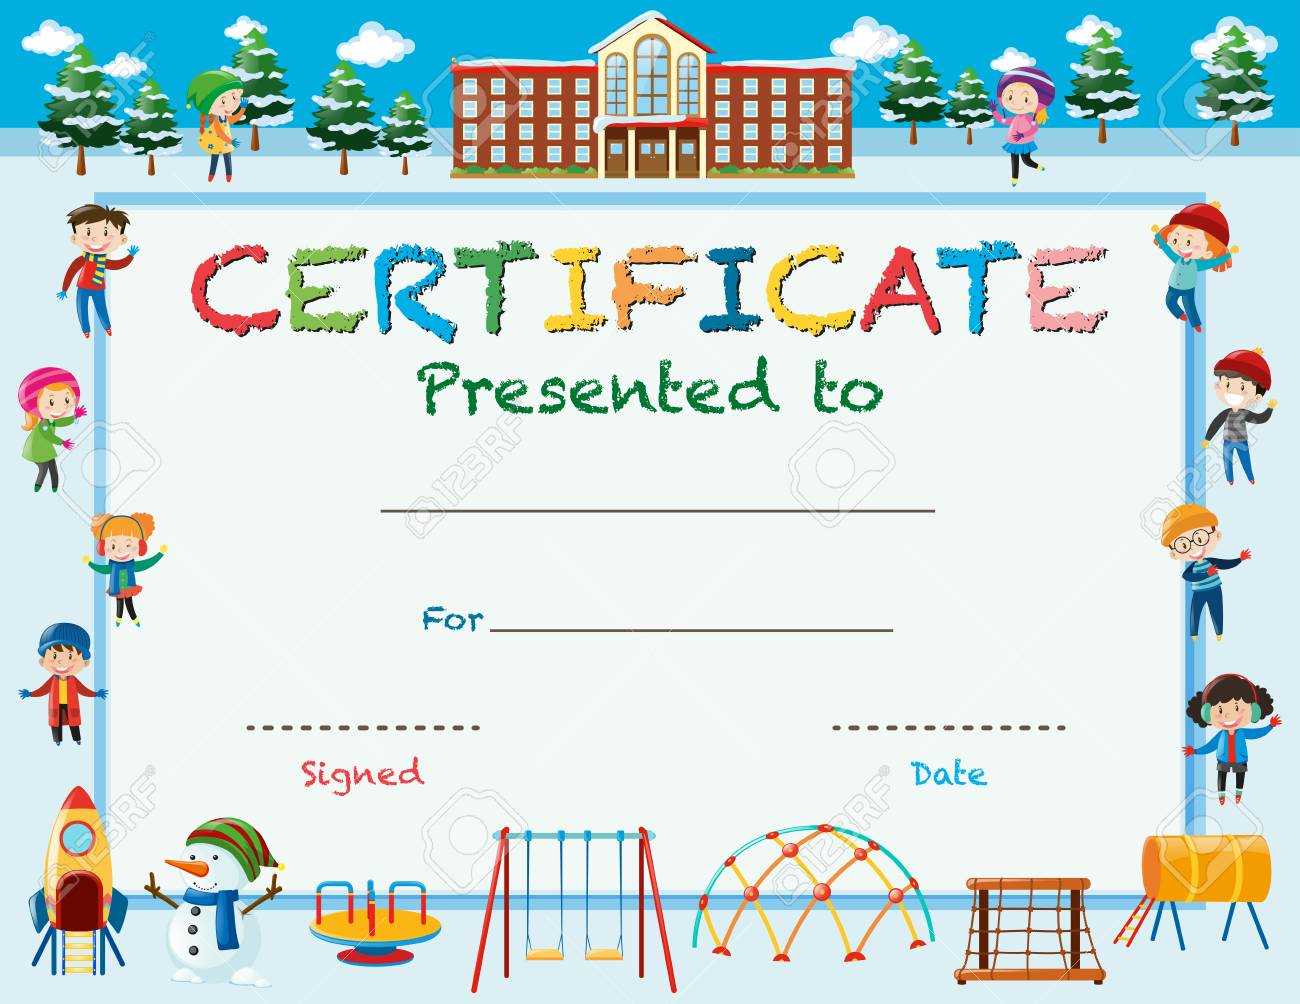 Certificate Template With Kids In Winter At School Illustration Throughout Free School Certificate Templates